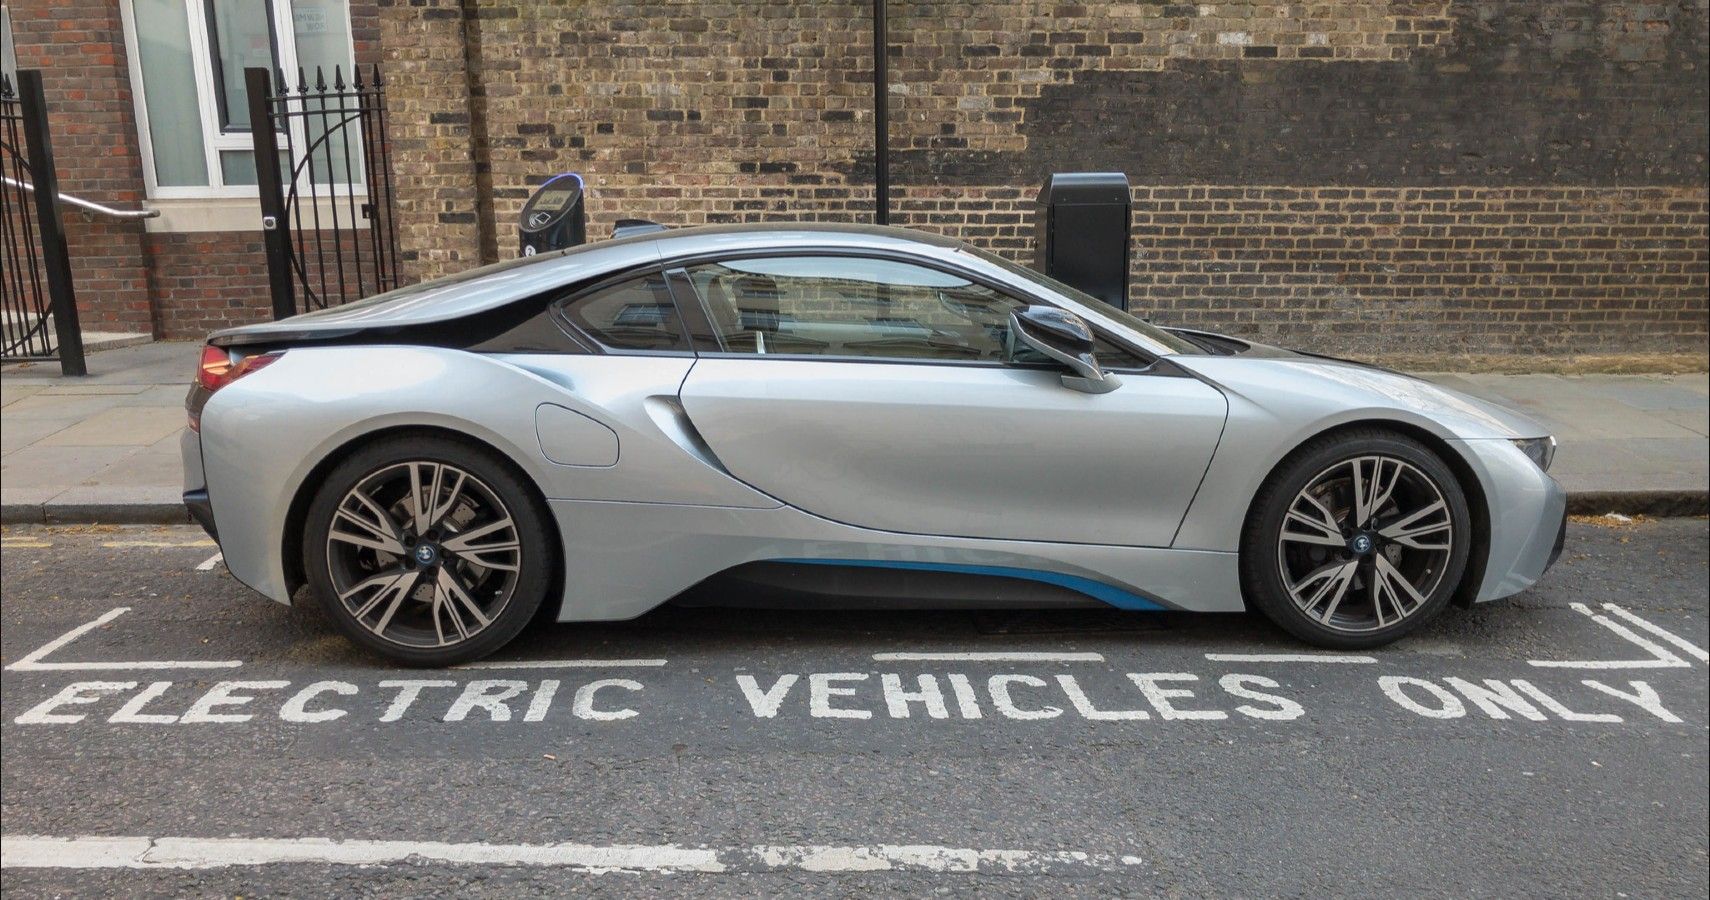 Electric Vehicles Only - BMW i8